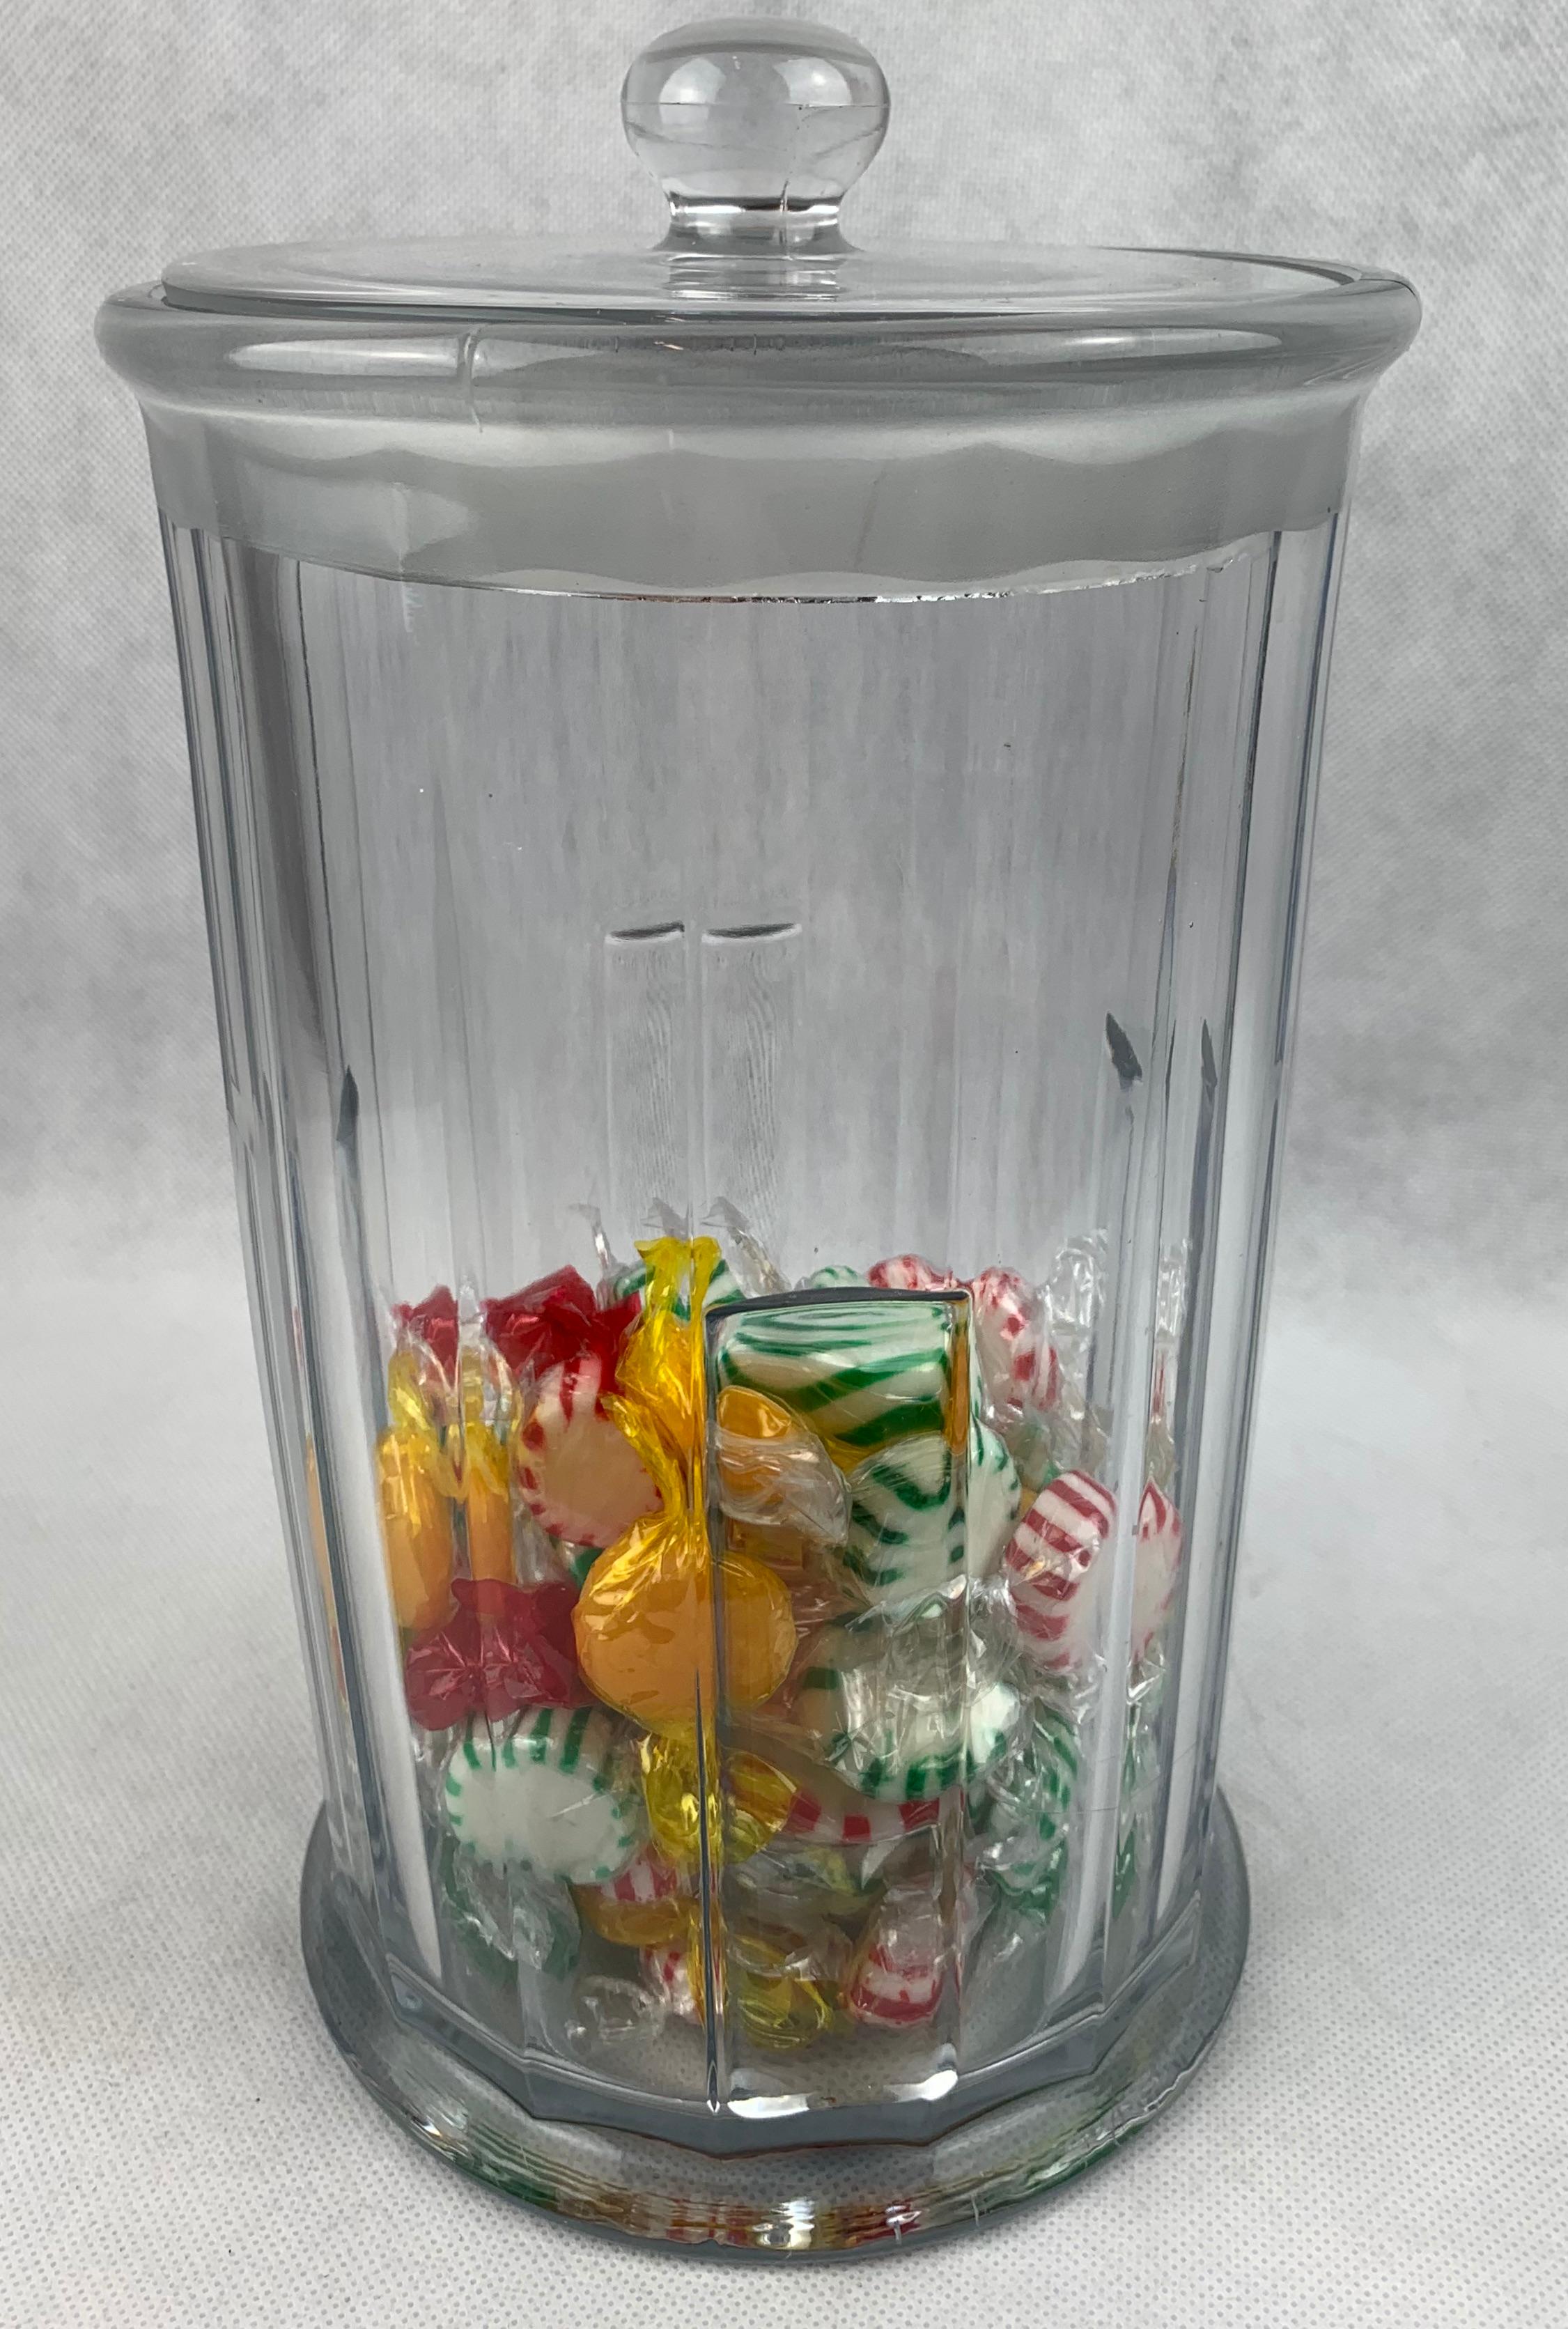 American Apothecary Jar by Heisey Glass made for John Hood Co., Boston 